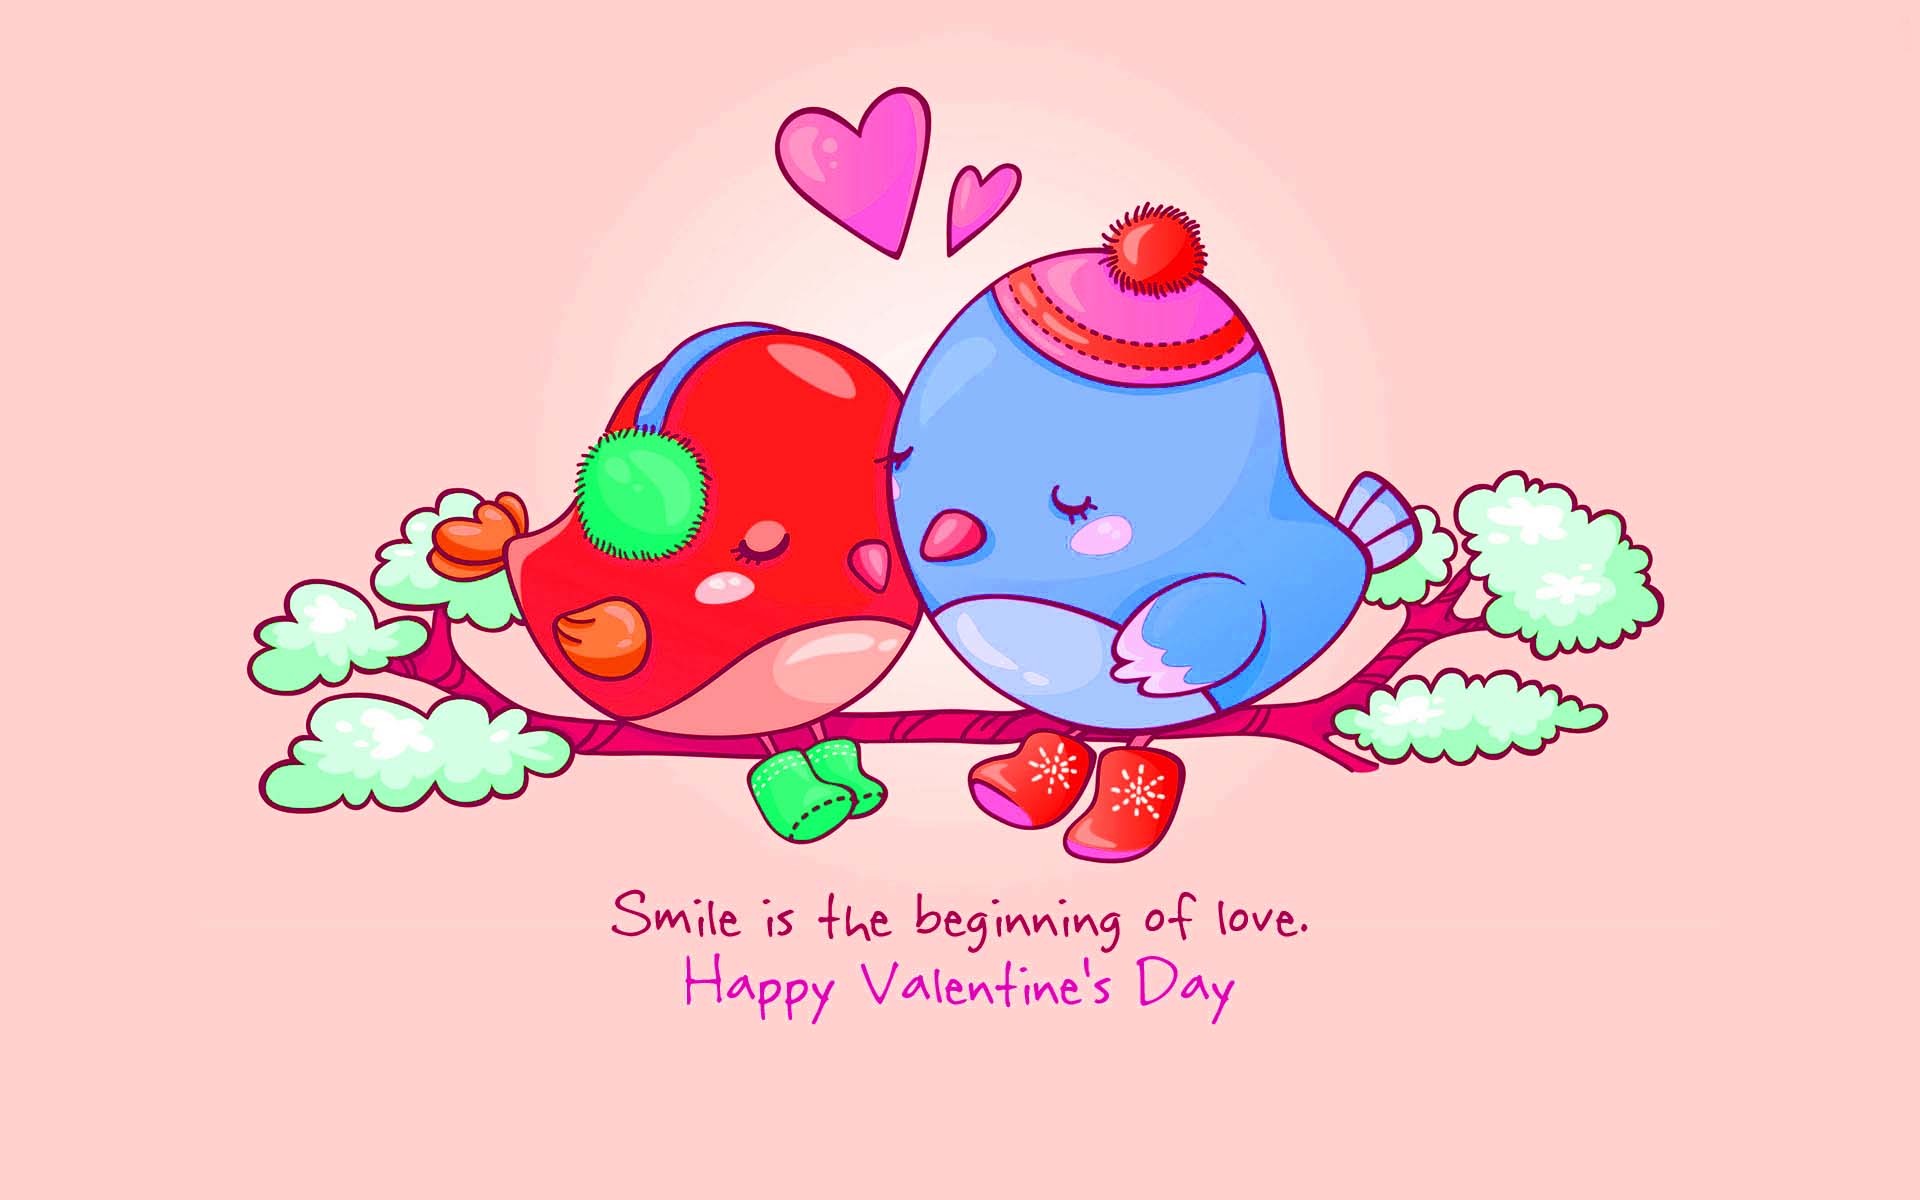 Cute Valentines Day Background Image